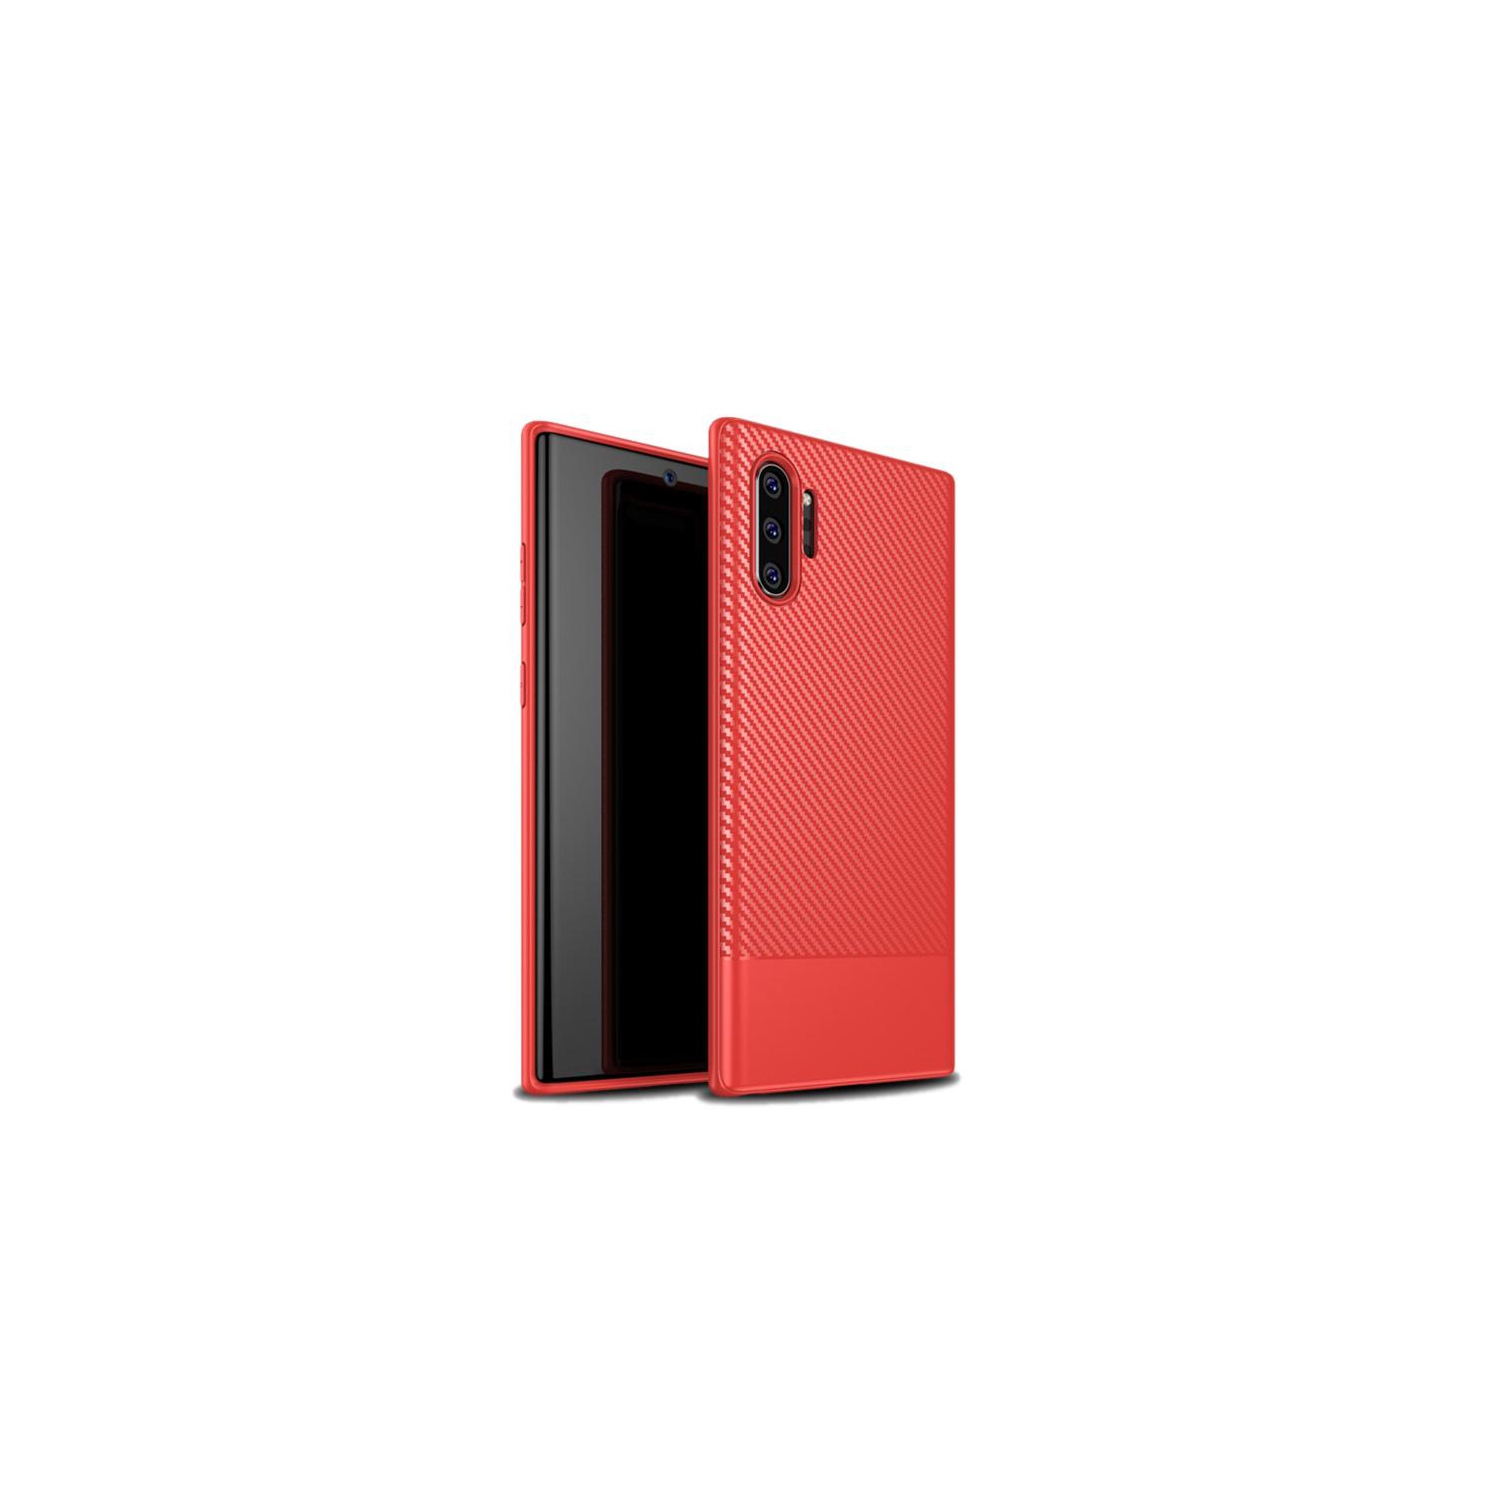 PANDACO Red Carbon Fiber Case for Samsung Galaxy Note 10+